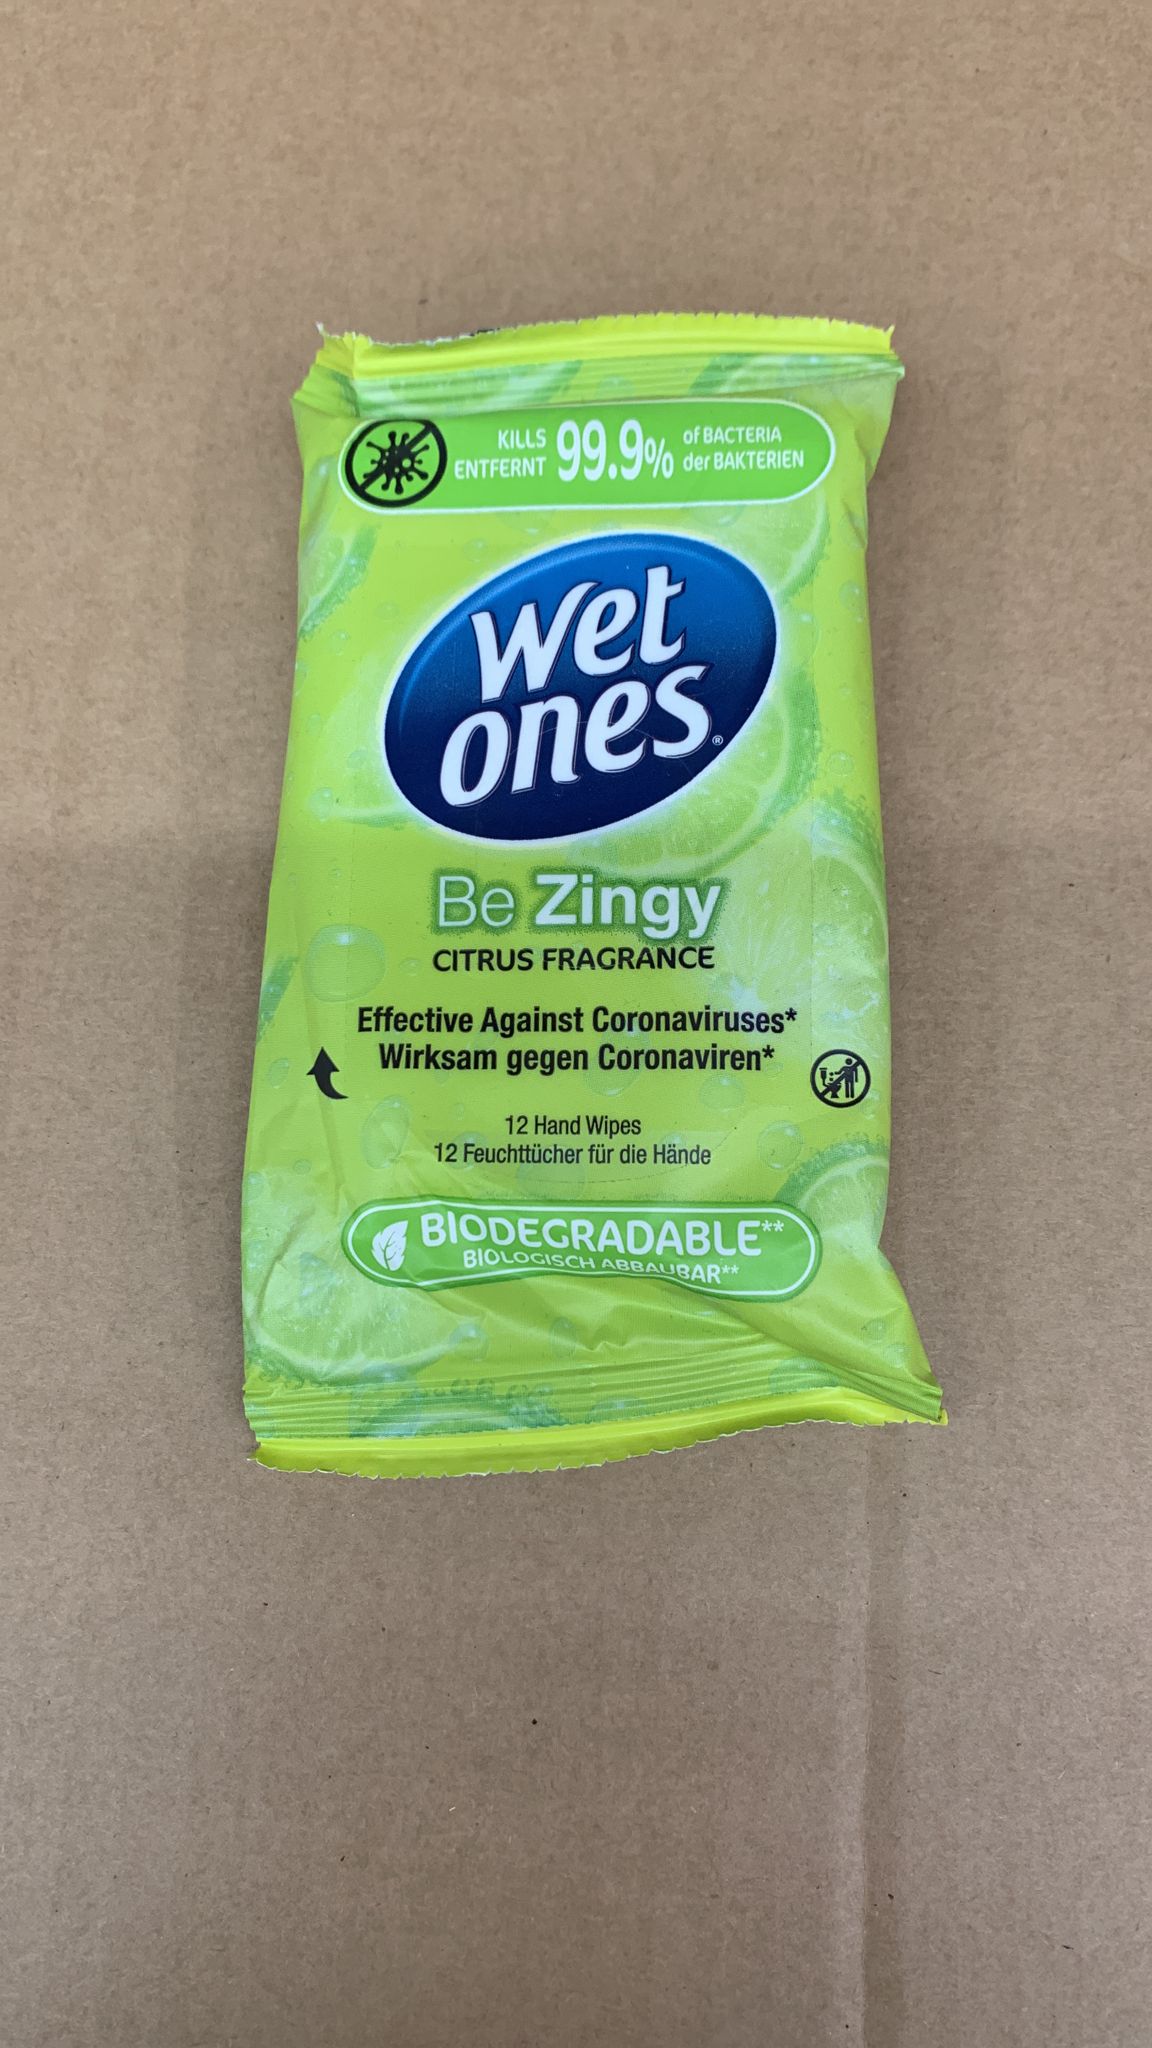 12x Wet Ones Be Zingy Biodegradable Antibacterial Wipes, 12 Pack (12 qty) 0251